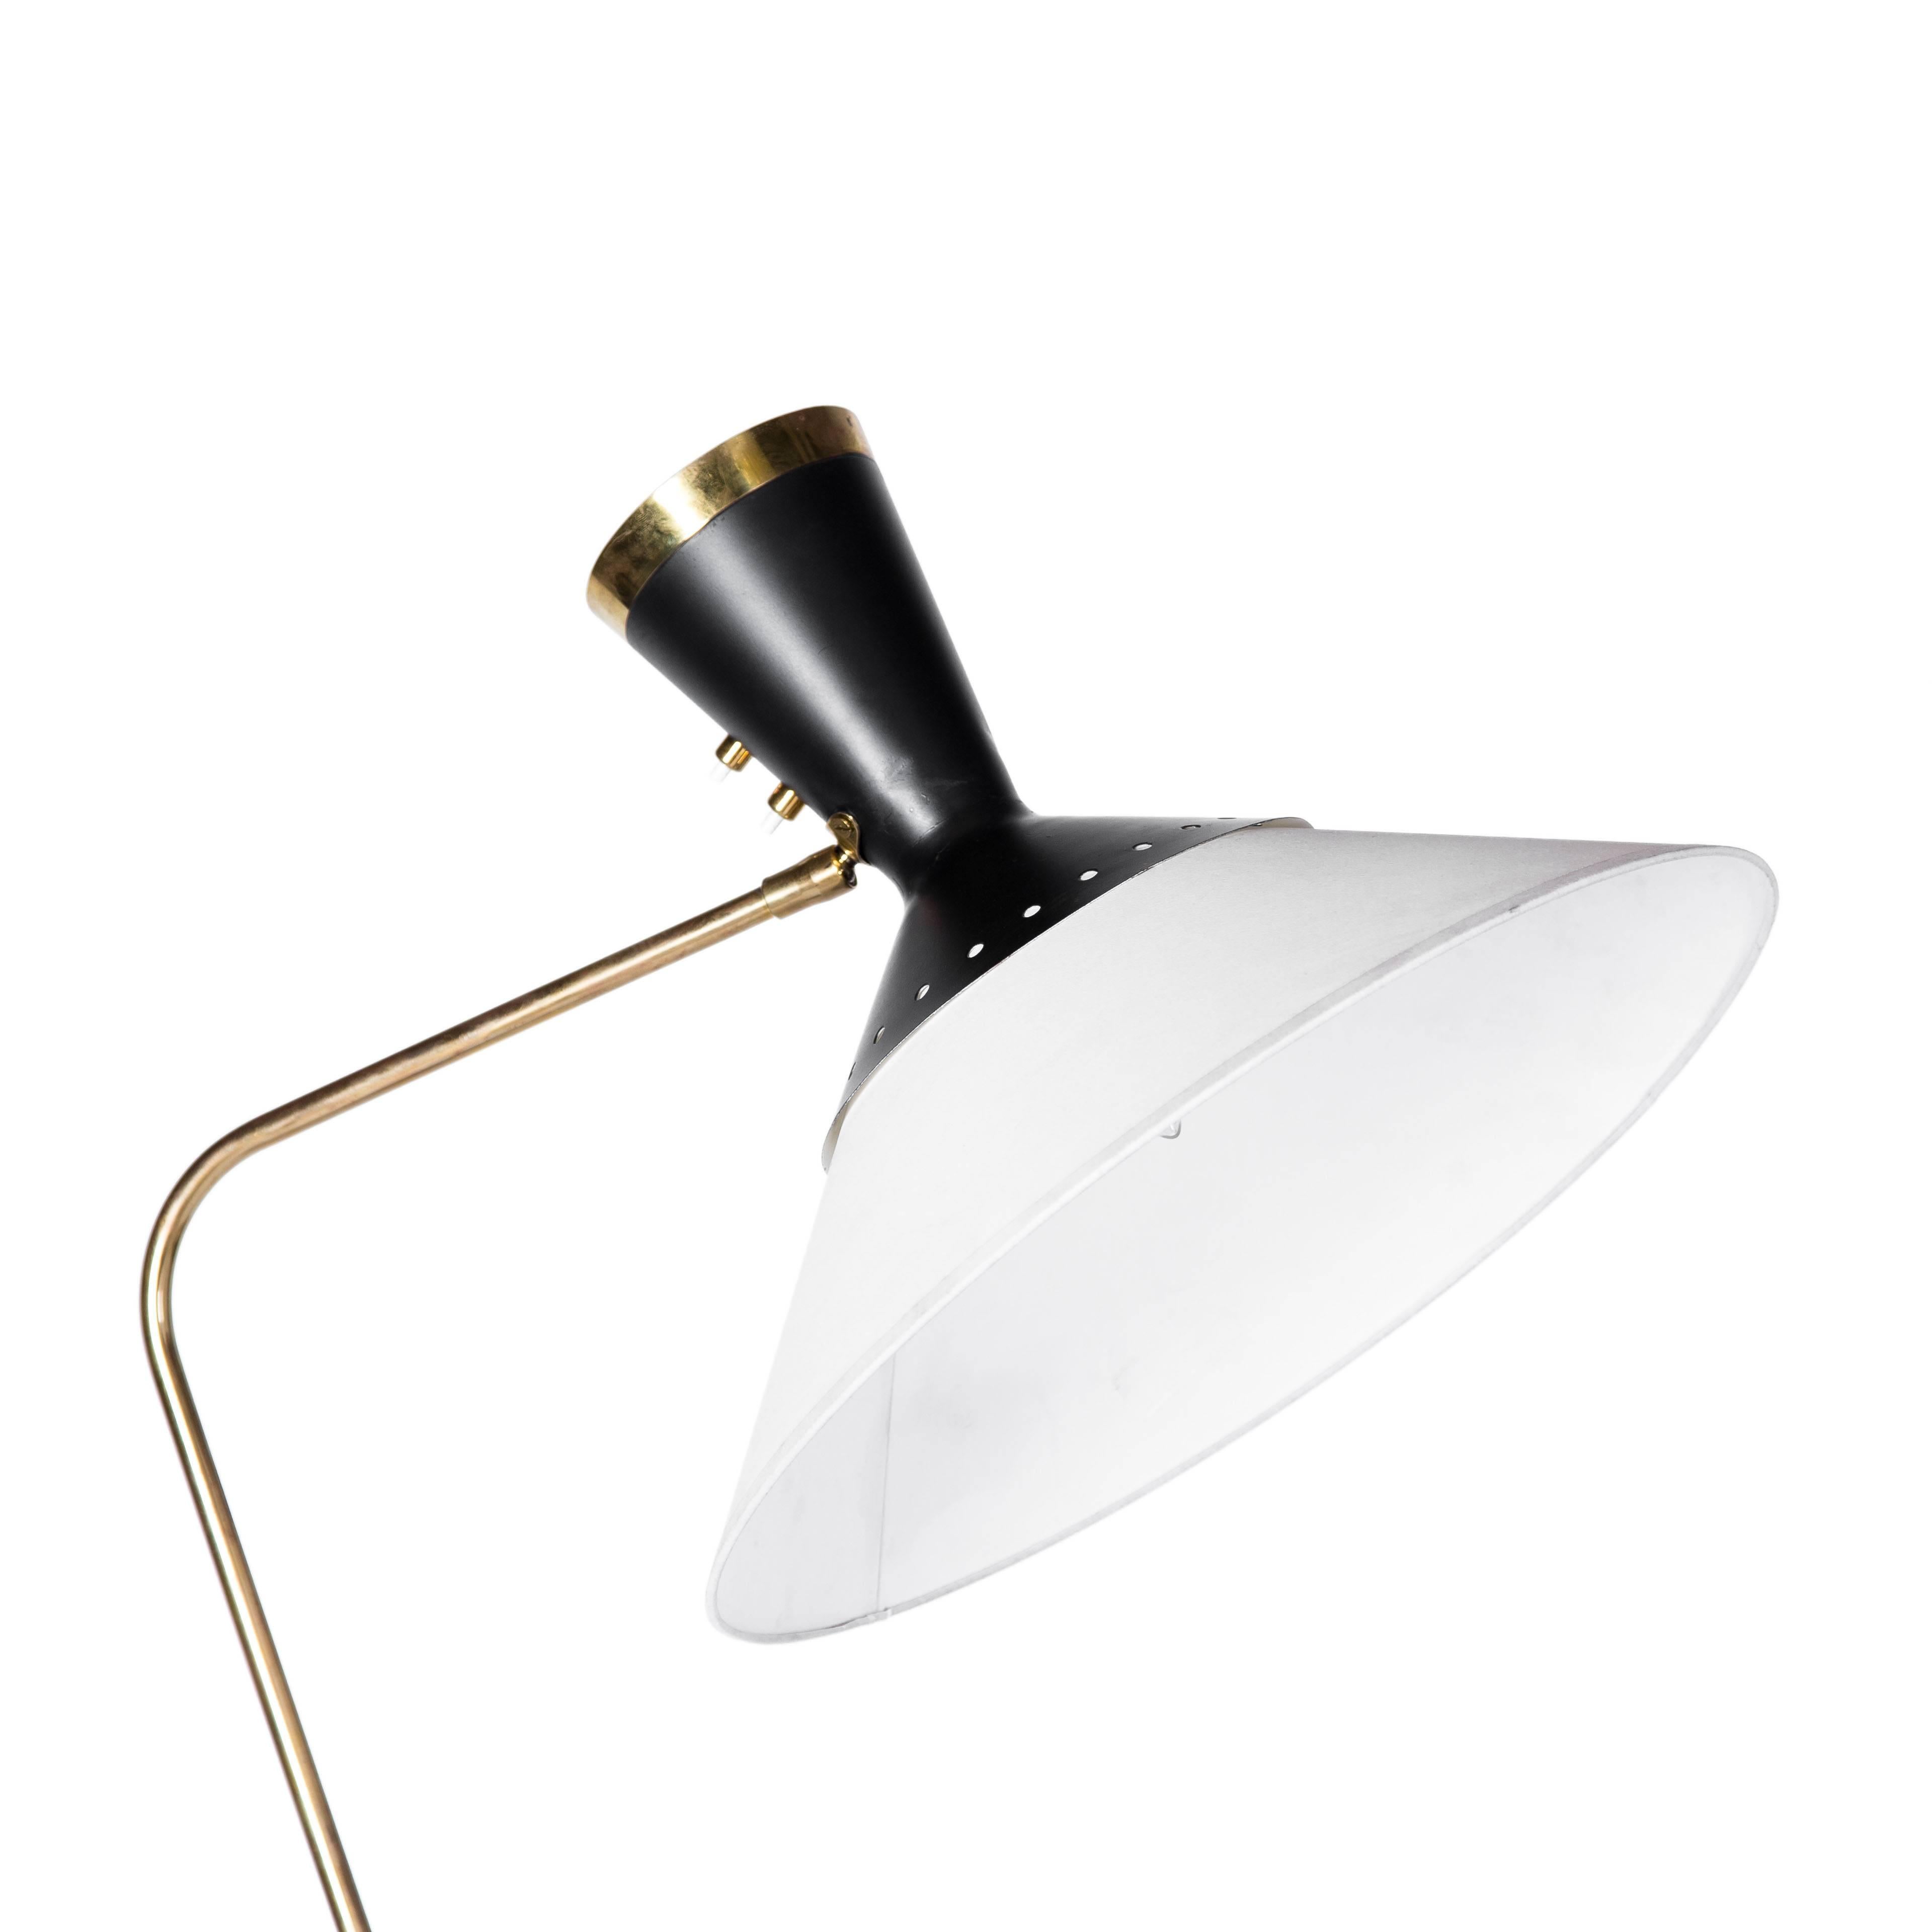 Formed double end shade on lacquered and brass neck with ball joint adjustable base. Uses (2) candelabra base light bulbs. 

Newly rewired for use in the United States. Shade is 16